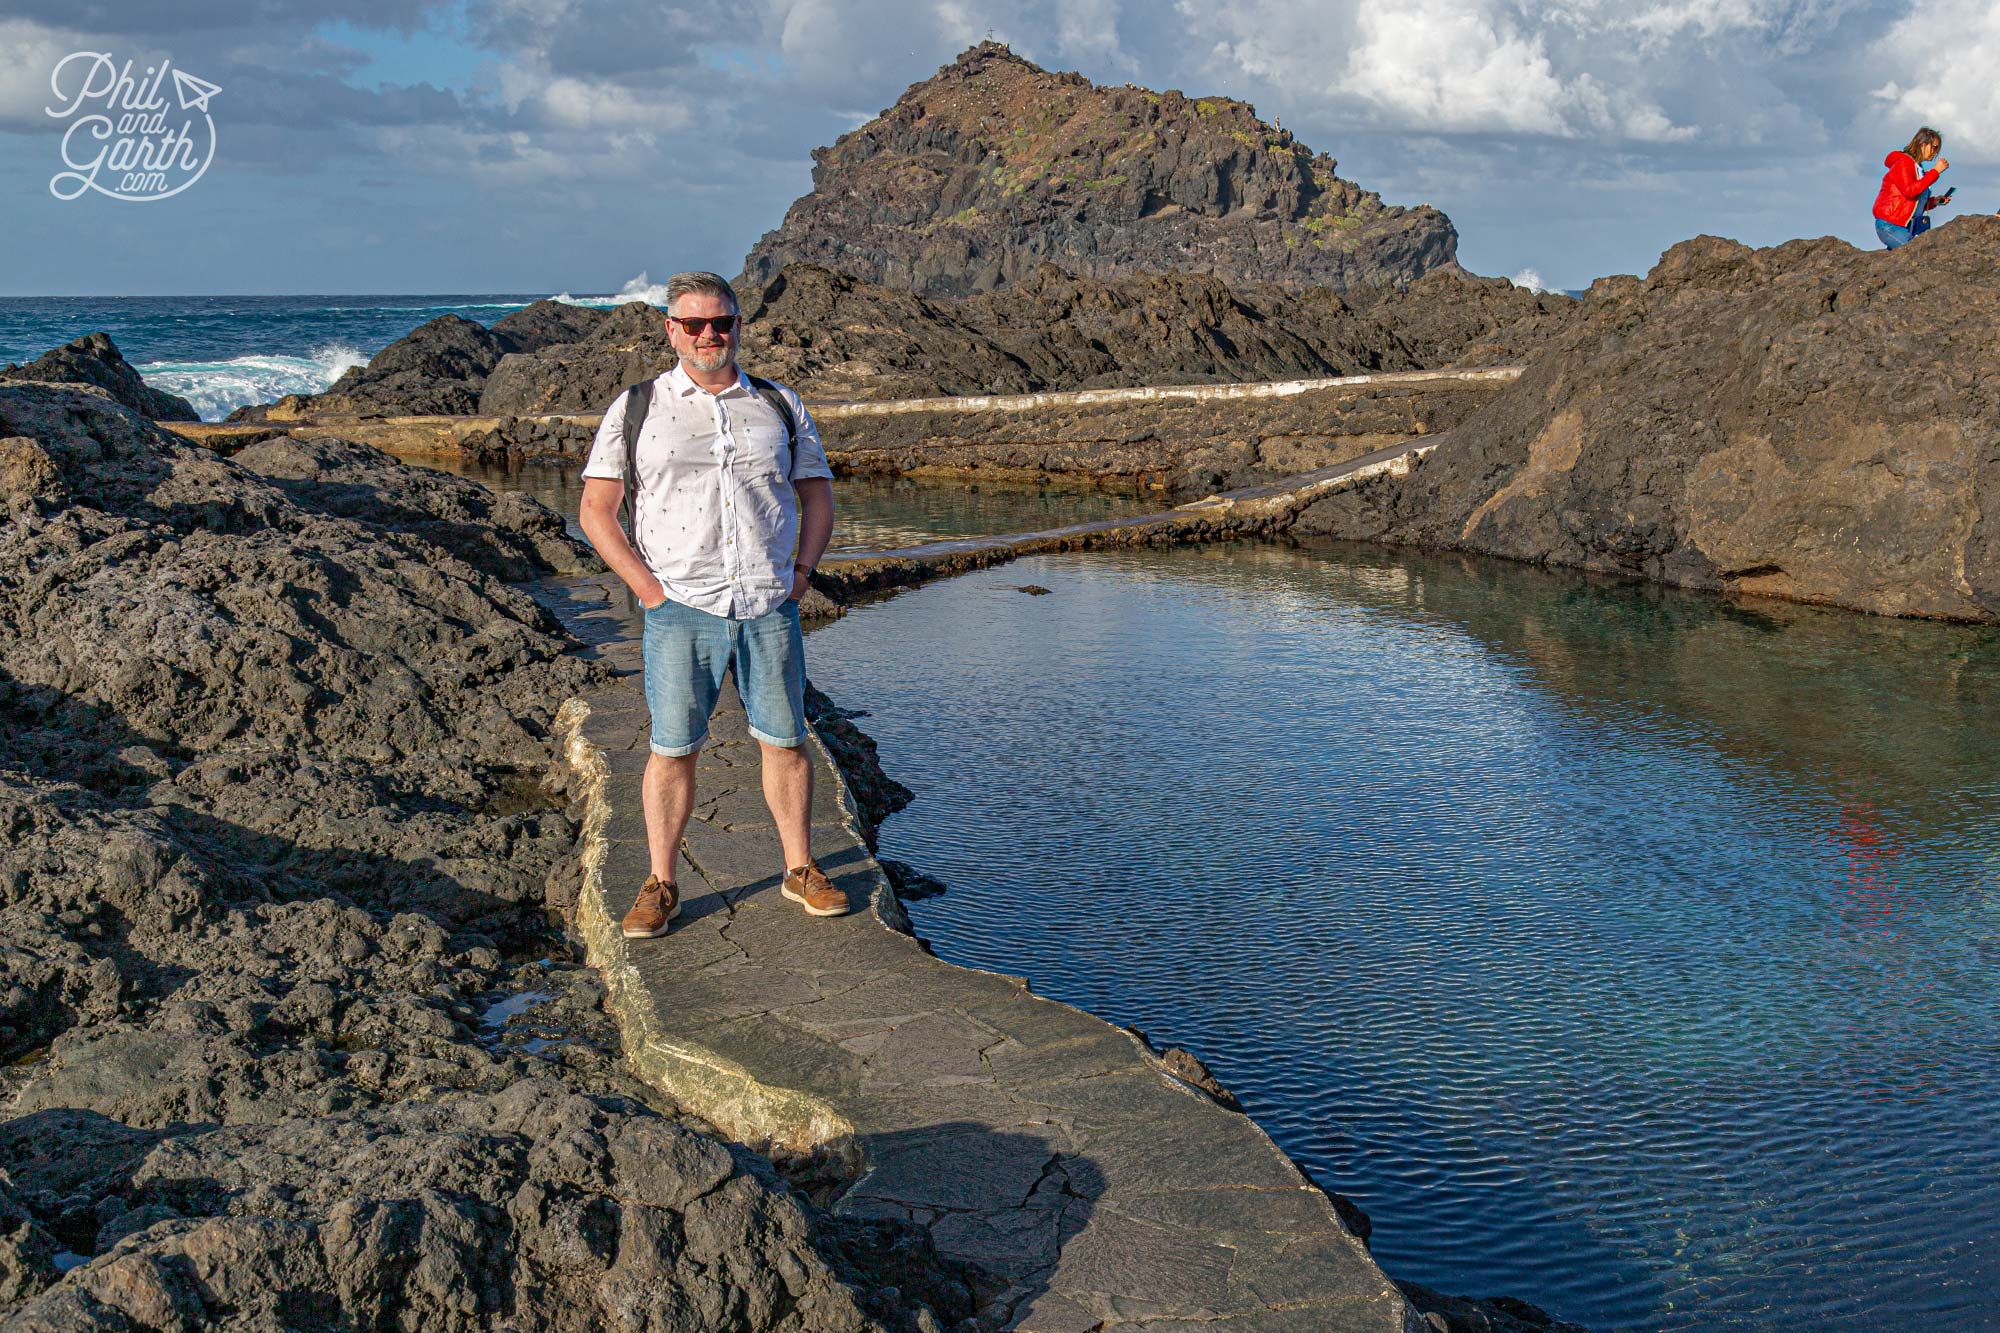 Wandering around these natural volcanic rock pools